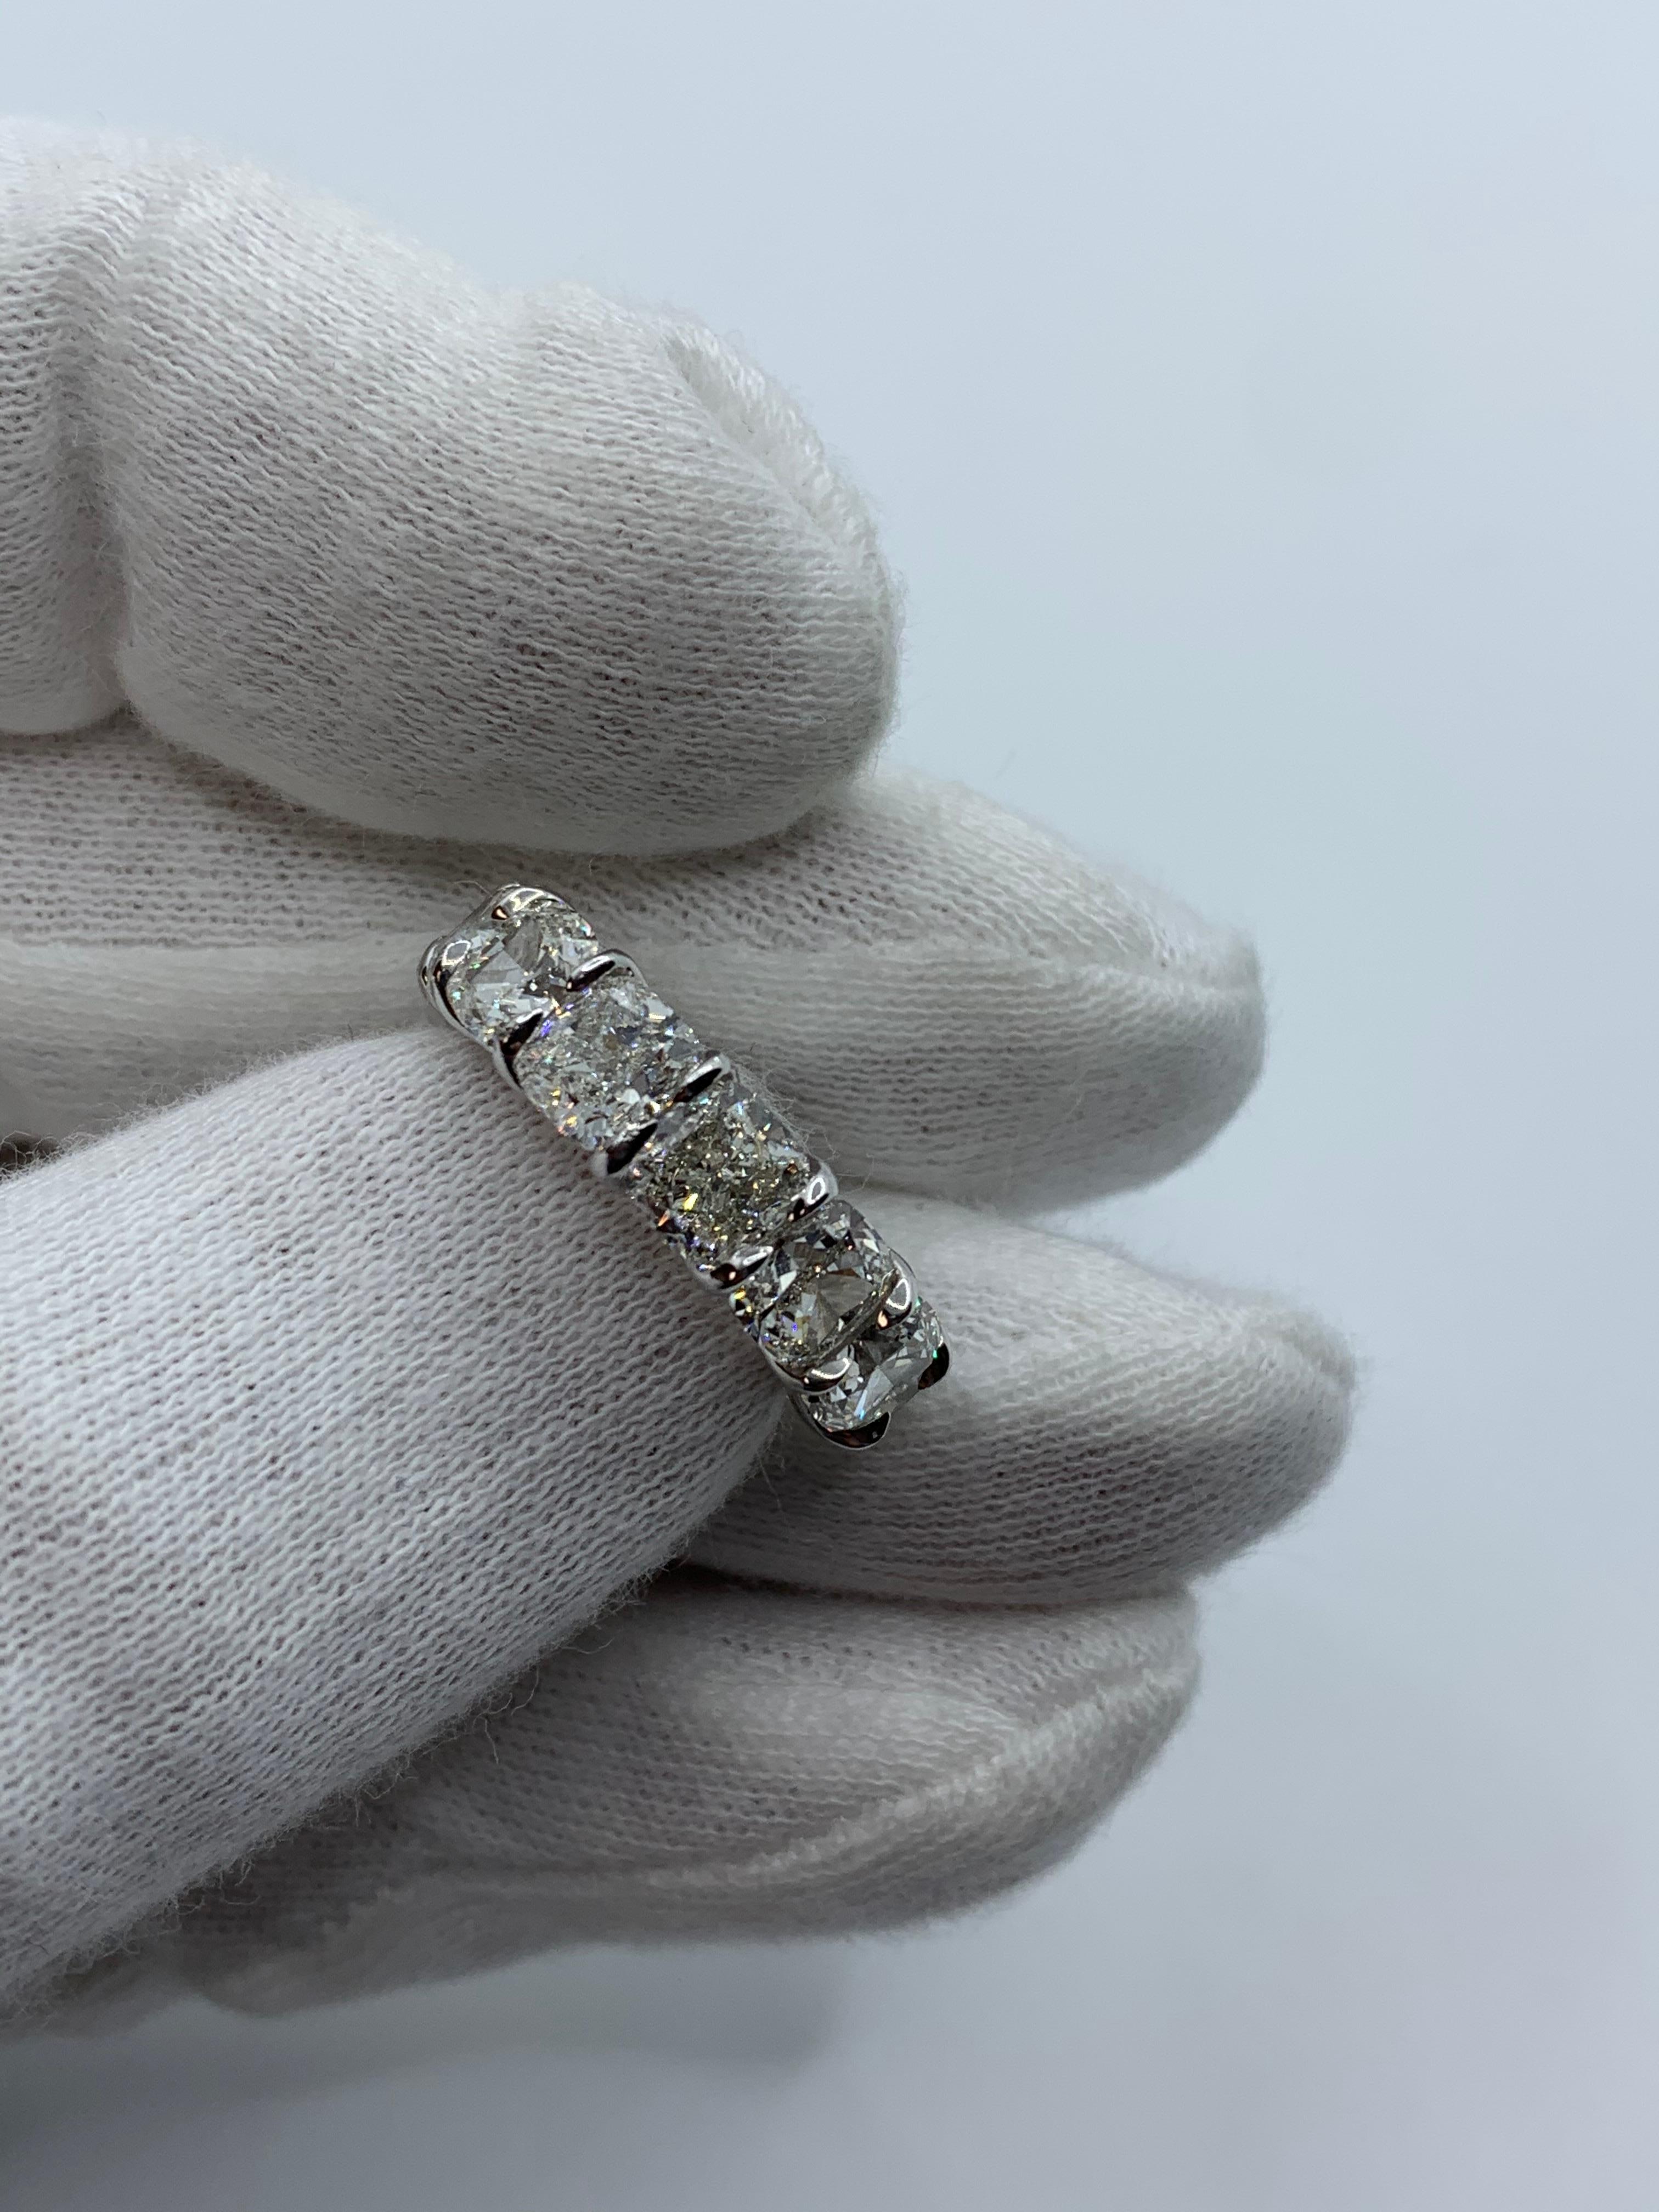 This beautiful Eternity Band is set with 13 perfectly matched Cushion Cut Diamonds, each weighing between  0.90ct to 0.96ct for a total of 11.90 Carats. Each stone is certified by GIA as DEF color and VVS-VS clarity. Made in New York City using